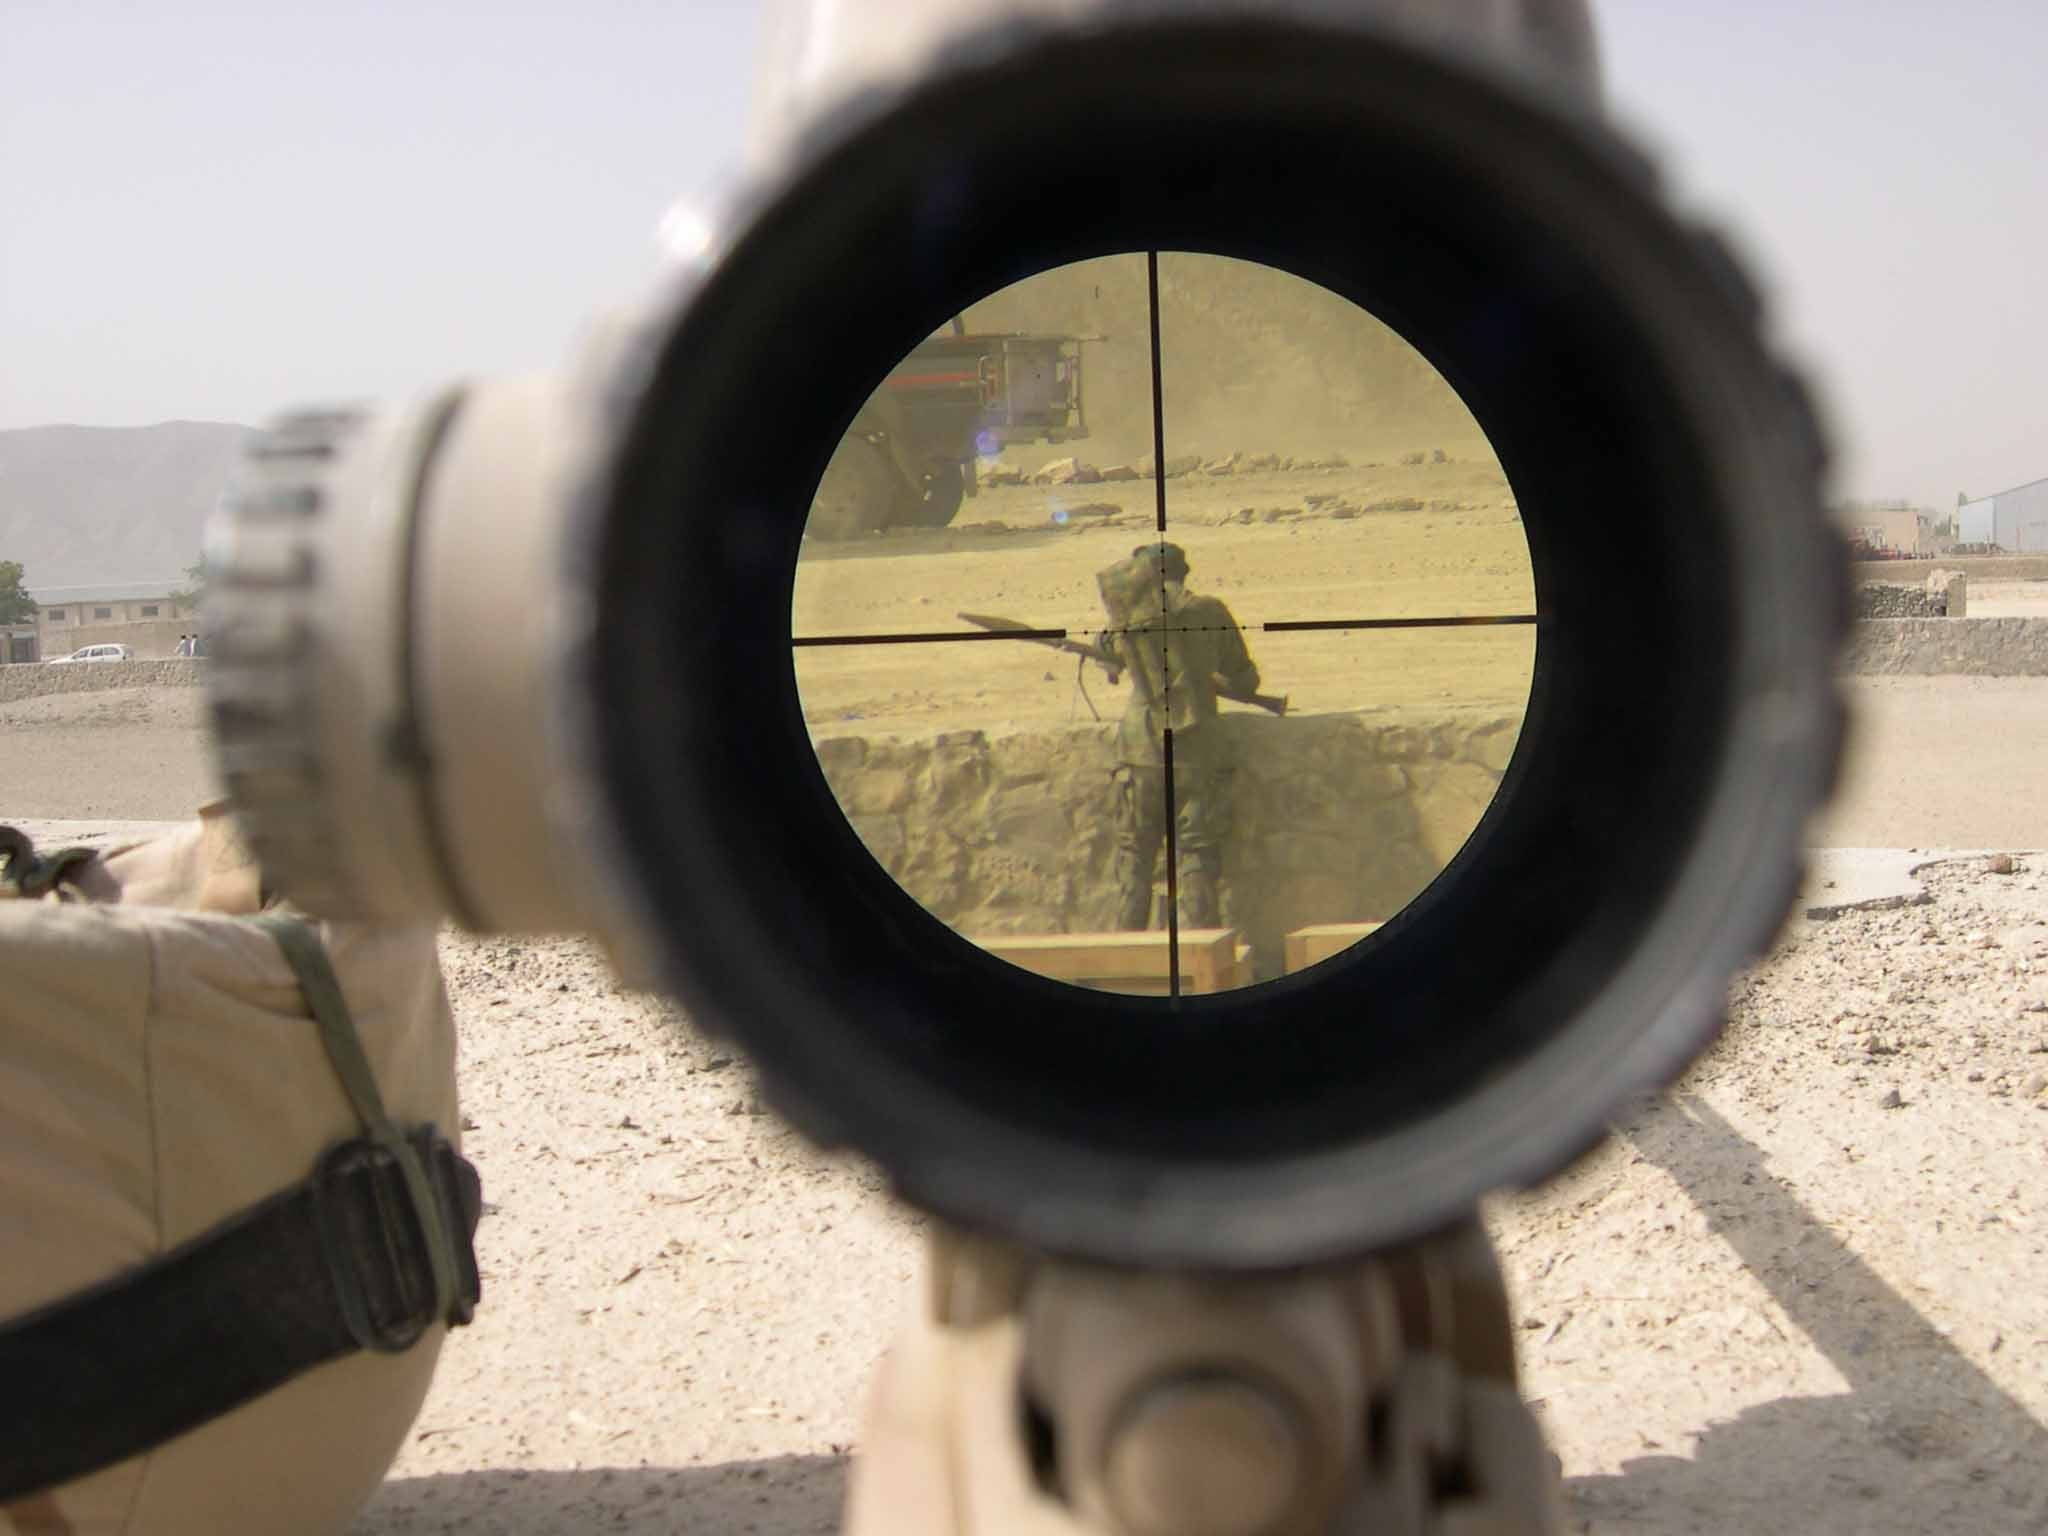 man carrying RPG view from rifle scope